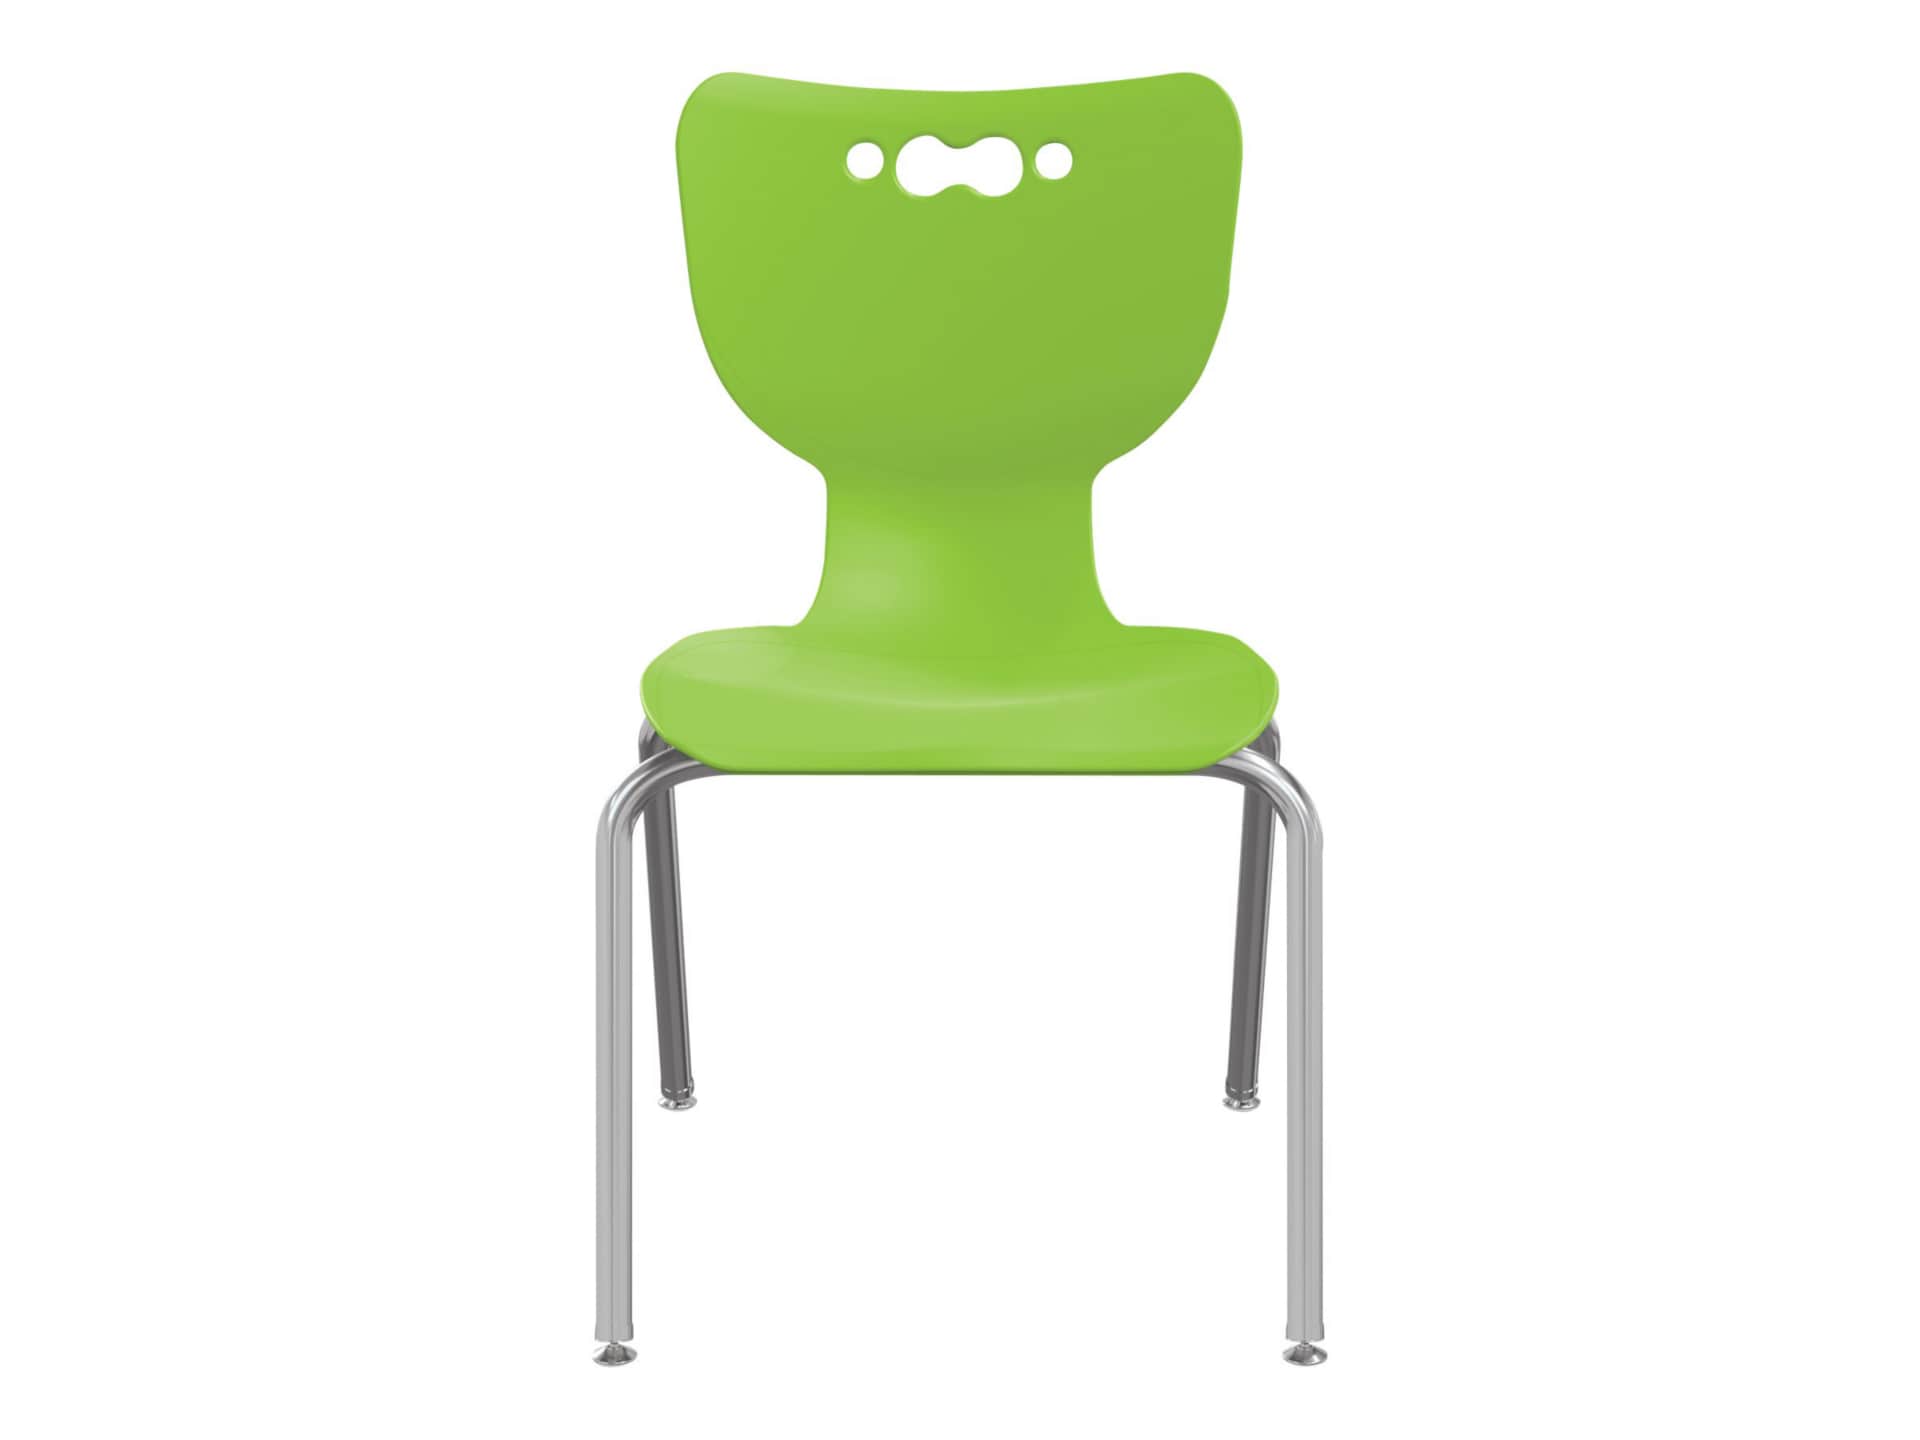 MooreCo Hierarchy - chair - injection molded polypropylene, heavy gauge steel - green, chrome